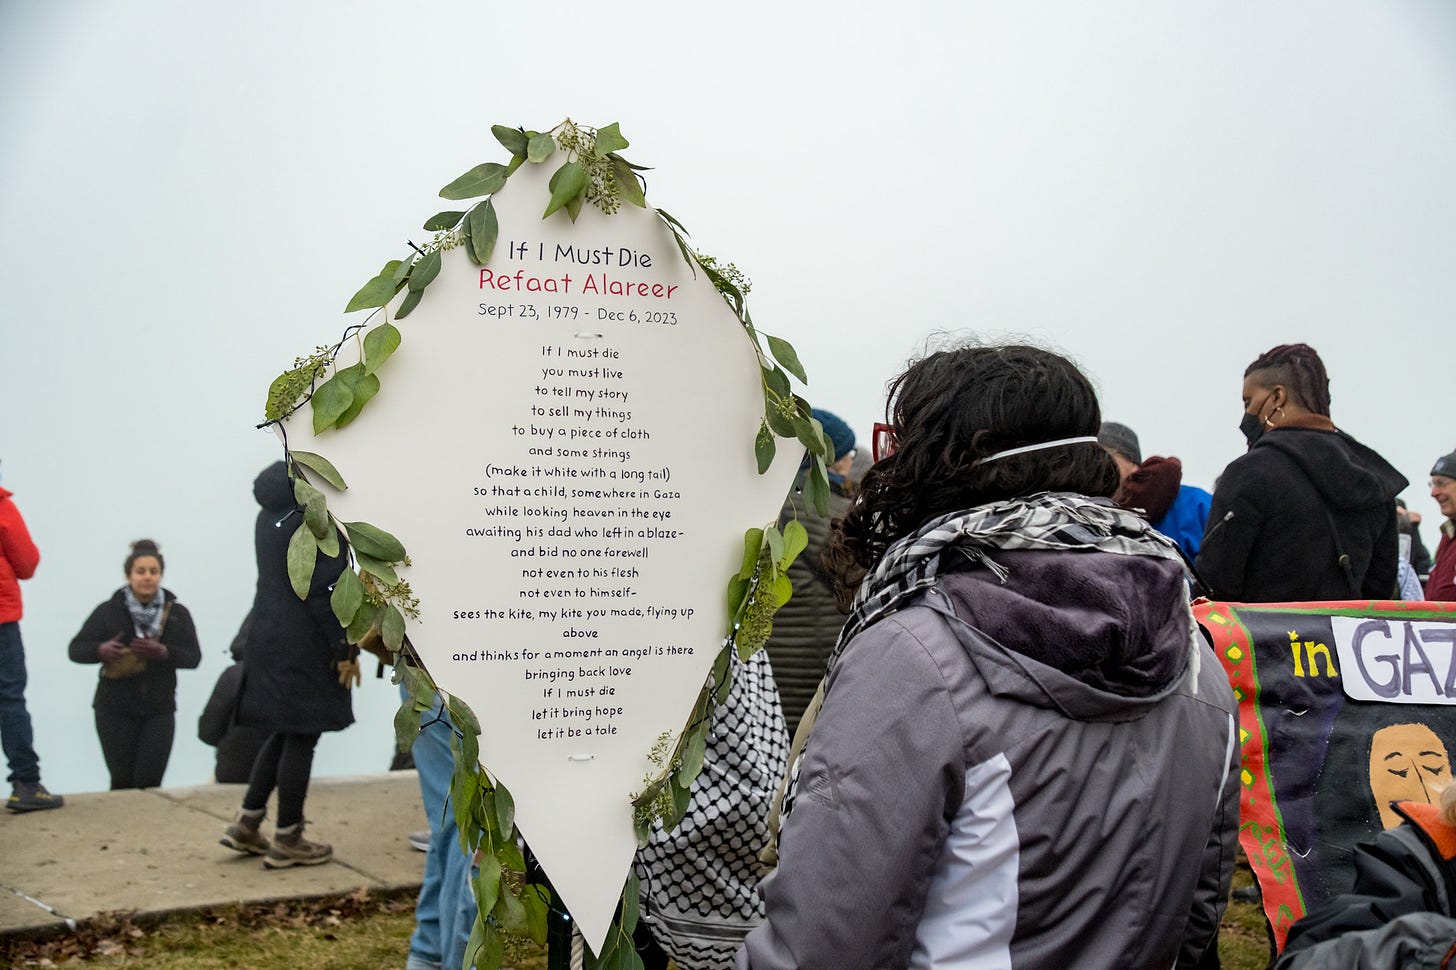 A protester looks at a decorative kite bearing the words of Refaat Alareer's poem "If I Must Die."